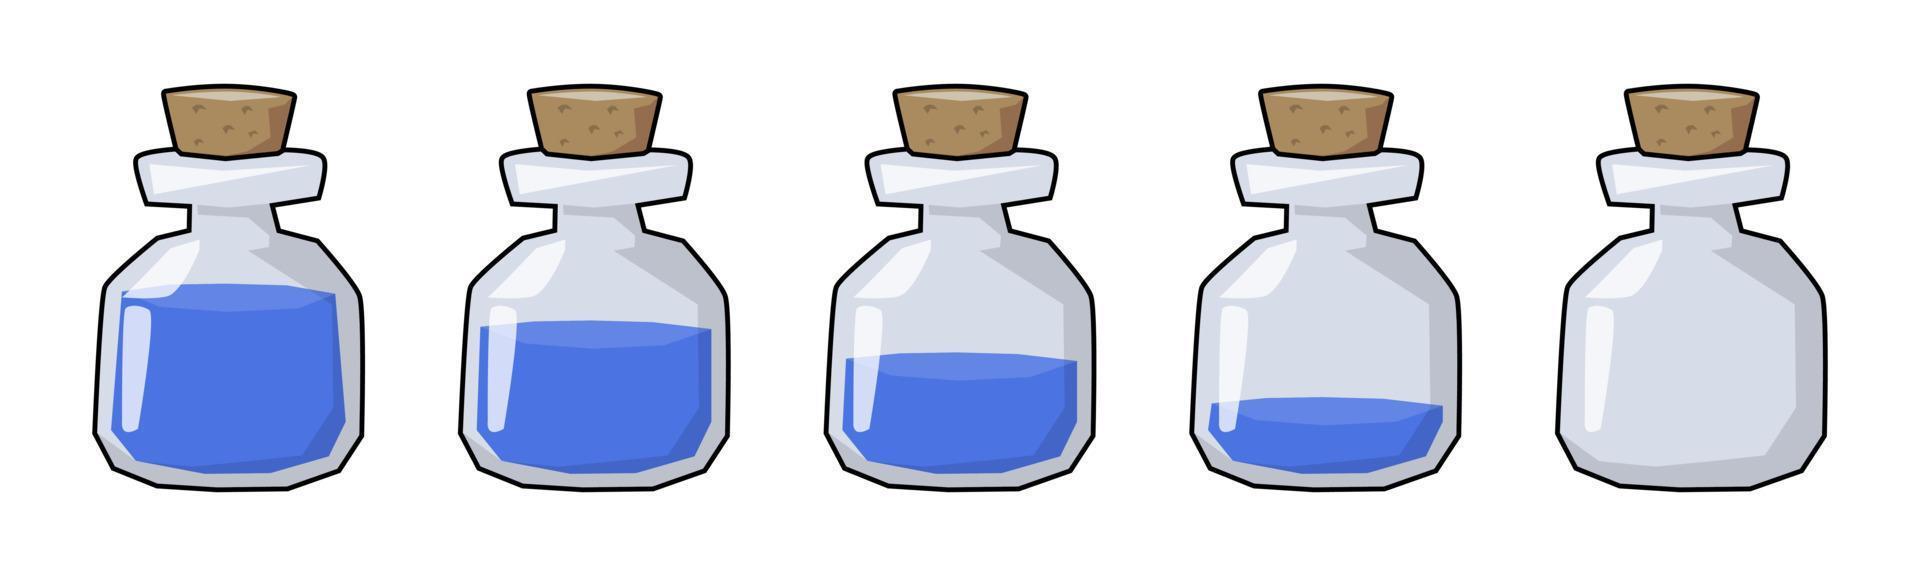 Cartoony Stylized Water Potion Bottle Video Game Vector Icon Template Set